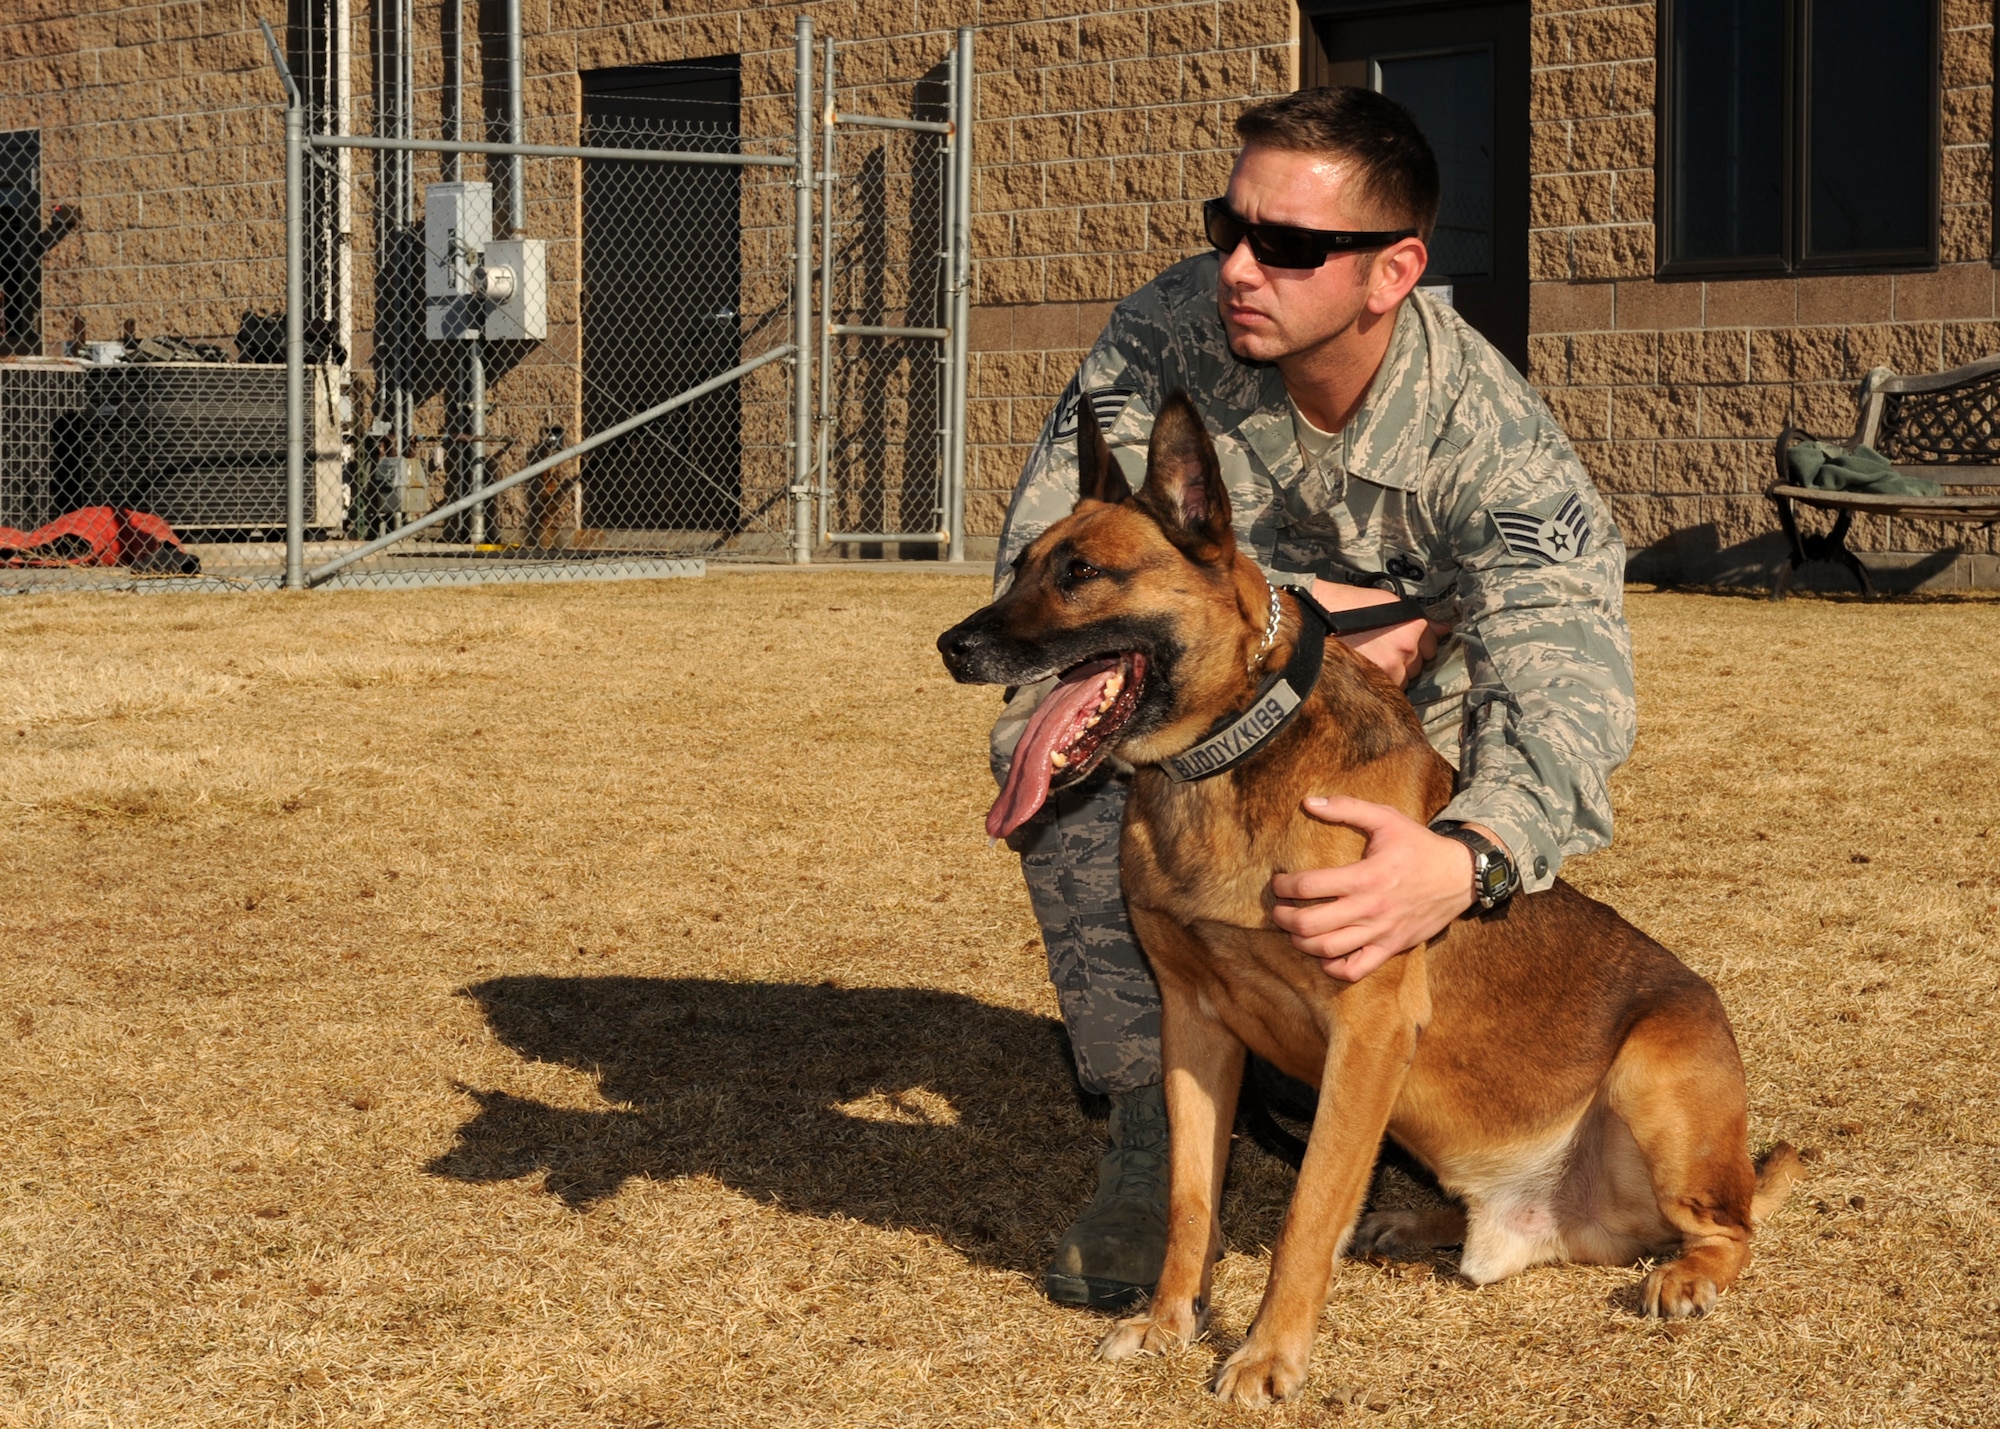 BUCKLEY AIR FORCE BASE, Colo. -- Staff Sgt. Michael Clark, 460th Security Forces military working dog handler, puts his partner, Buddy, at ease Jan 10, 2012. K-9 handlers are a devoted unit that spend much of their time with their K-9 partners training and preparing for deployments. (U.S. Air Force photo by Senior Airman Marcy Glass)
